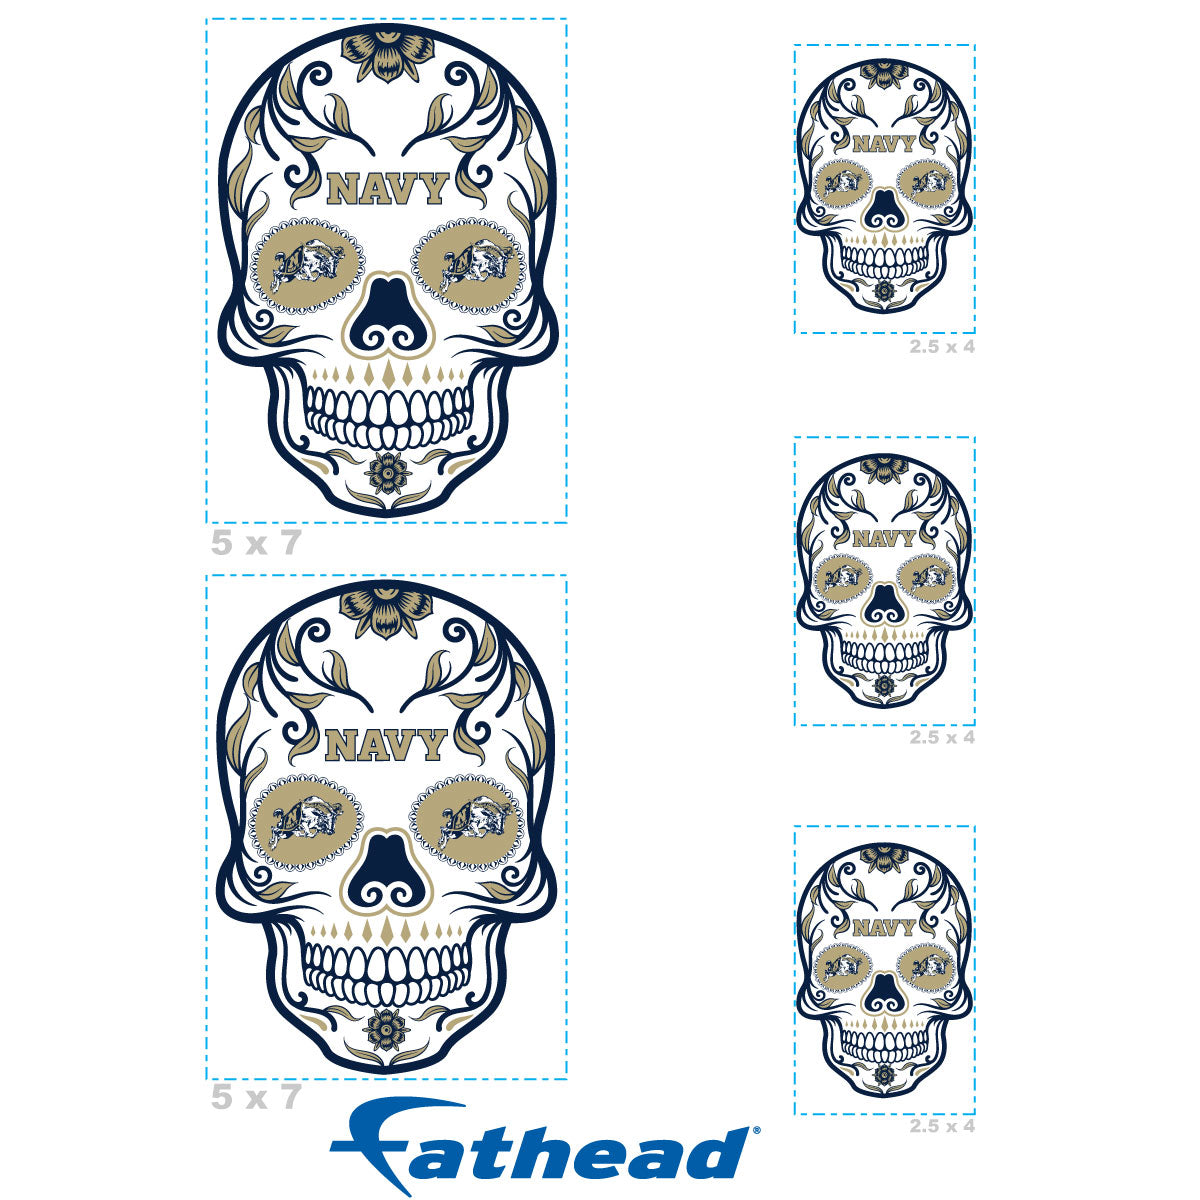 Sheet of 5 -Navy Midshipmen: Skull Minis - Officially Licensed NCAA Removable Adhesive Decal